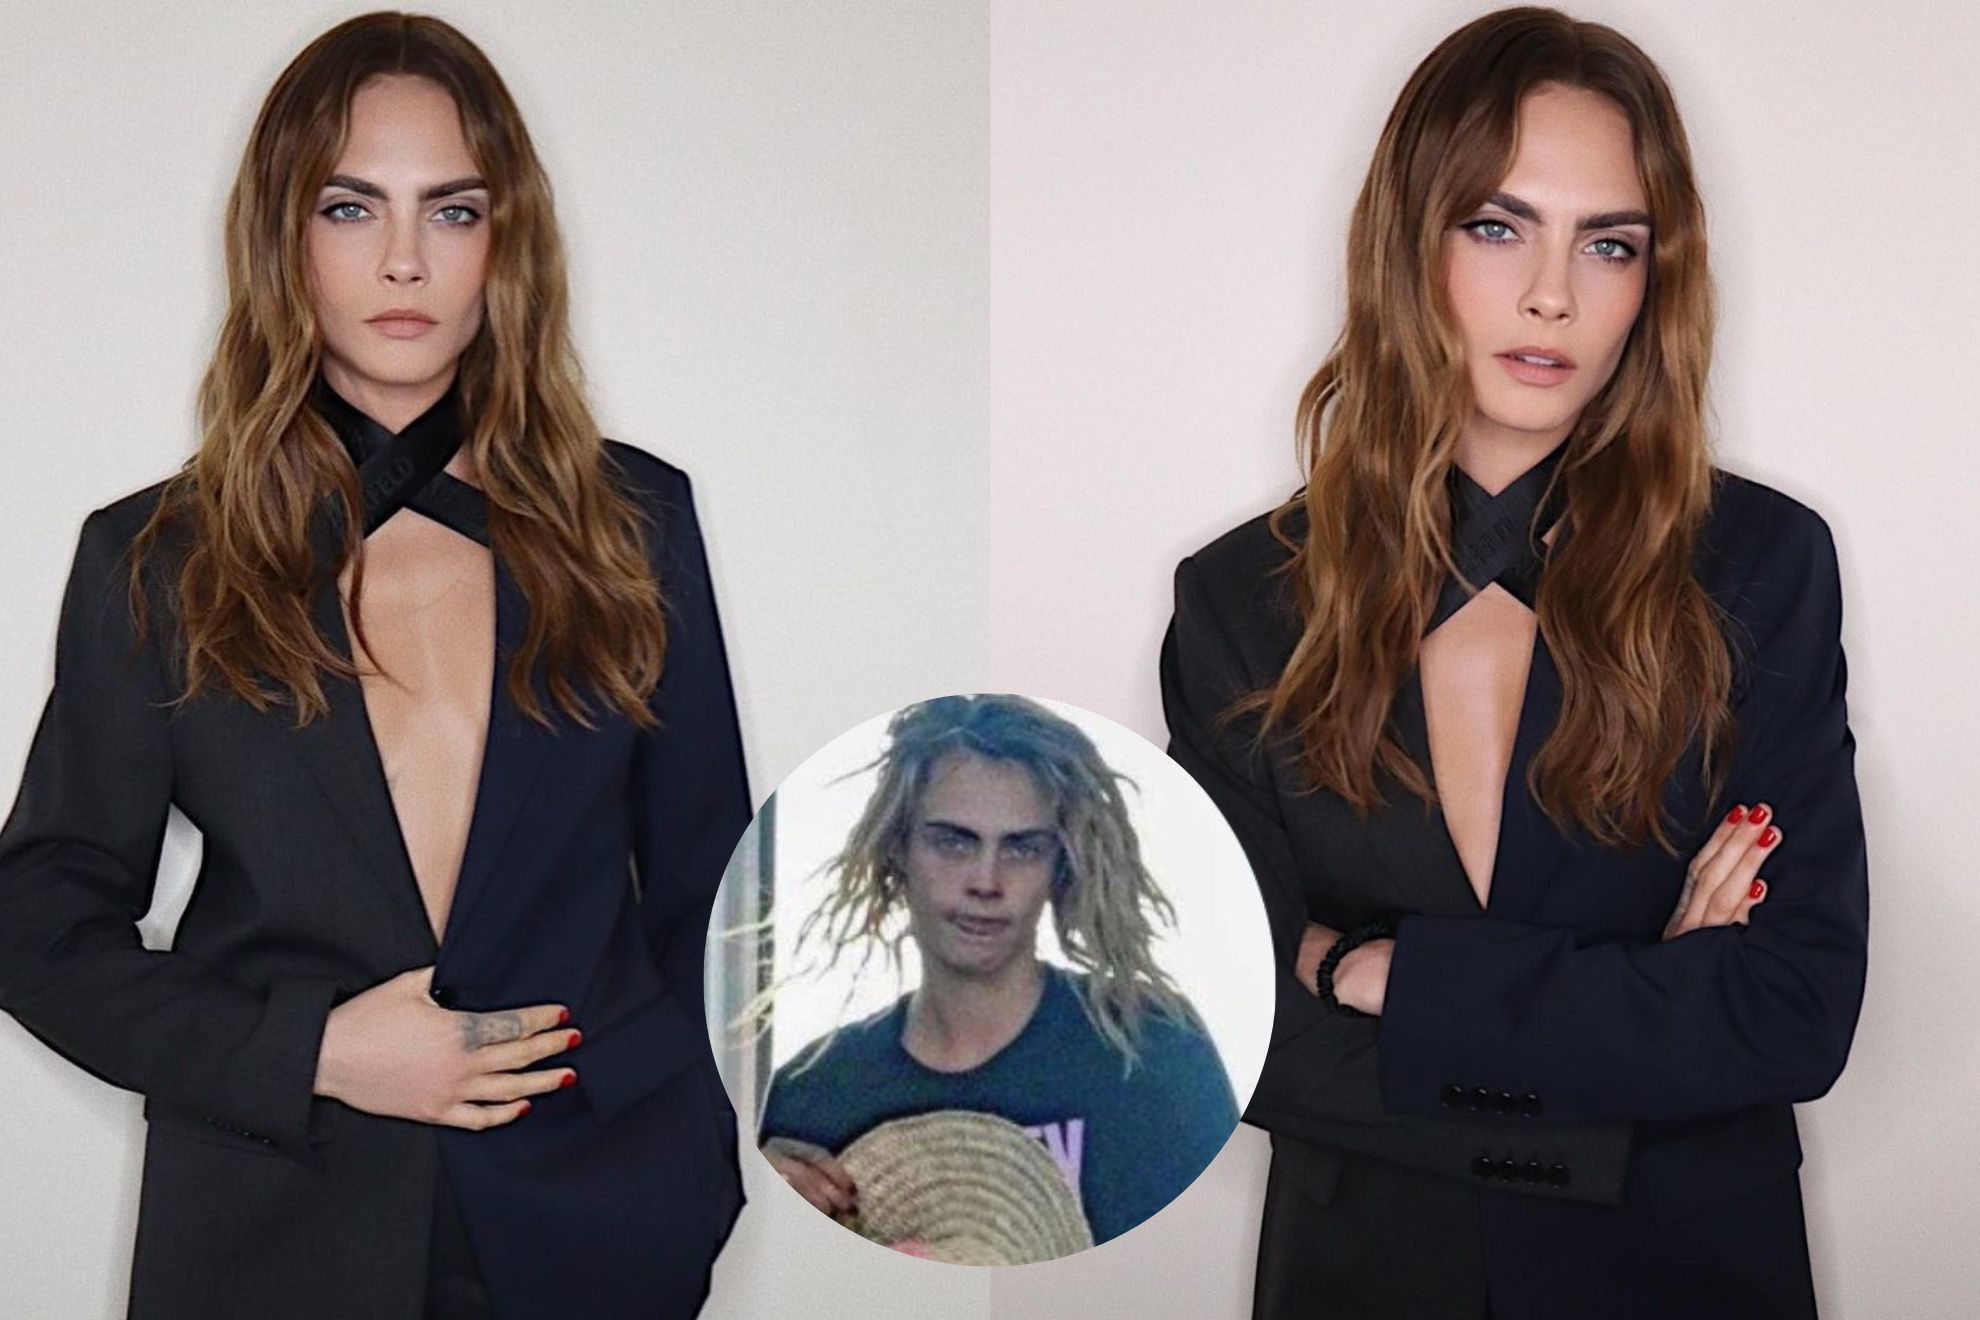 Pictures that the model shared before her public appearance, with a more natural less makeup look. In the middle, how she appeared during her concerning episode earlier this month.-@caradelevingne